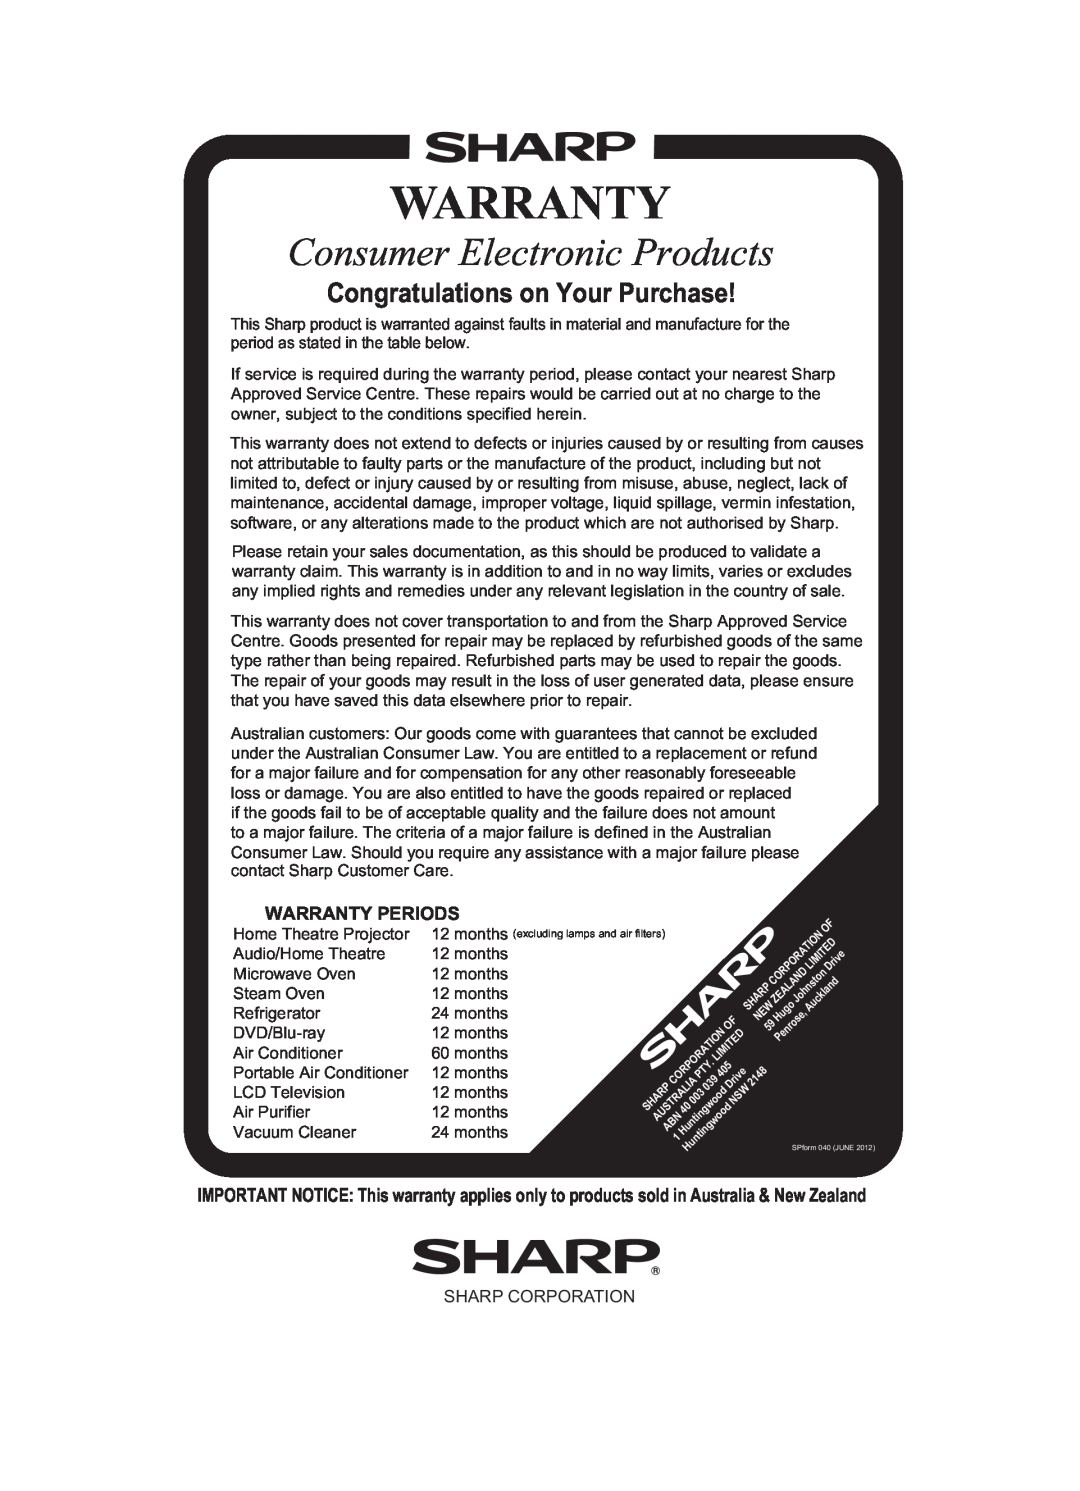 Sharp HT-SB602 Consumer Electronic Products, Congratulations on Your Purchase, Warranty Periods, Sharp Corporation 